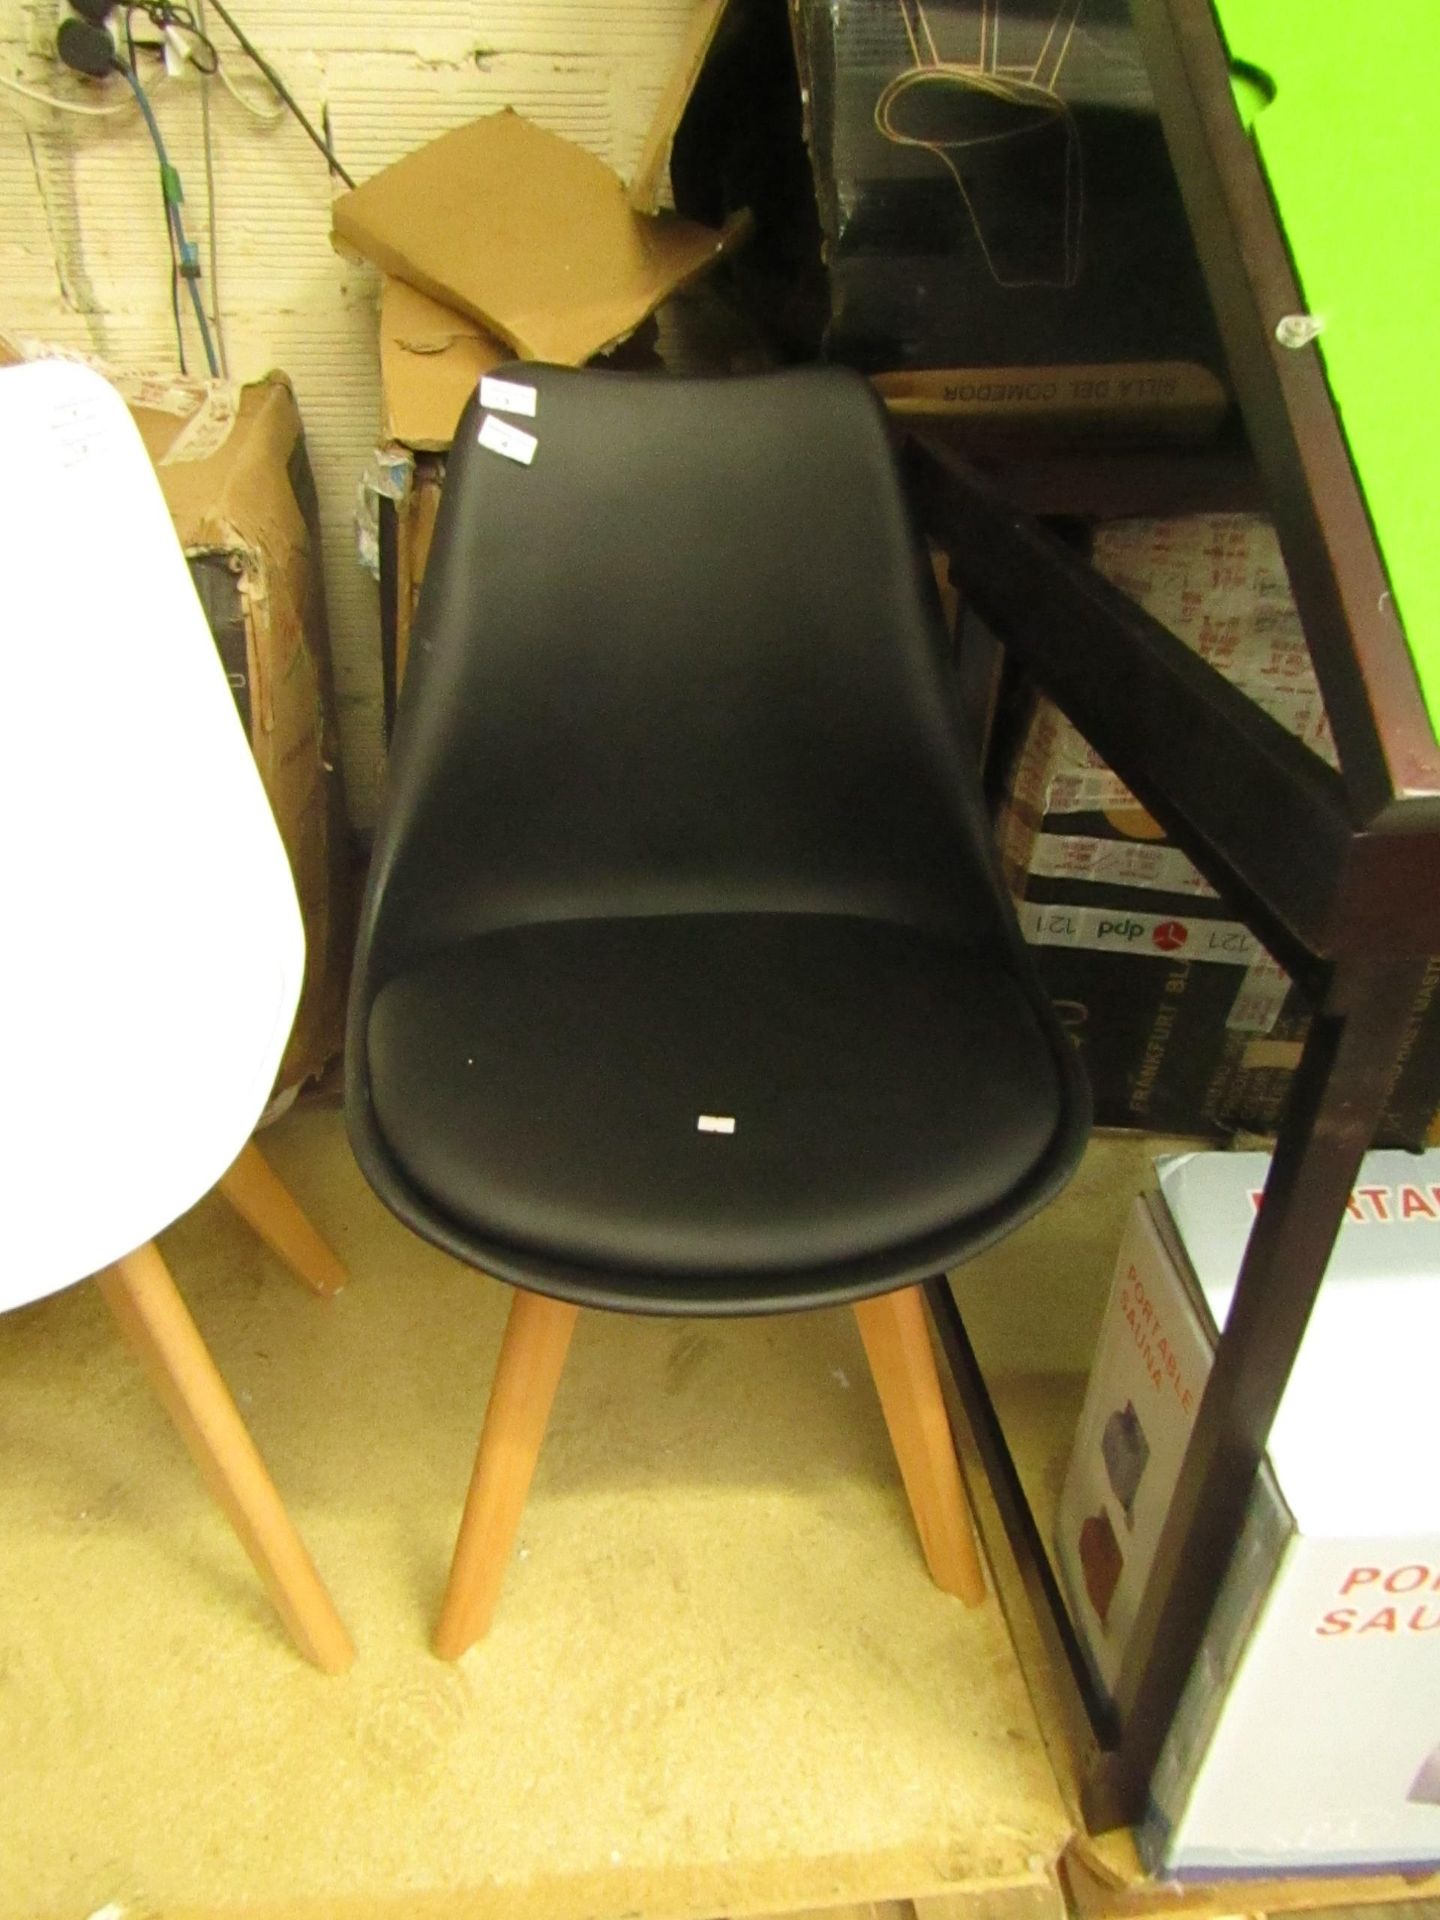 4 x Black Plastic Dining Chairs with Cushioned Seat & Wooden Legs.1 Built & 3 Flatpacked.New